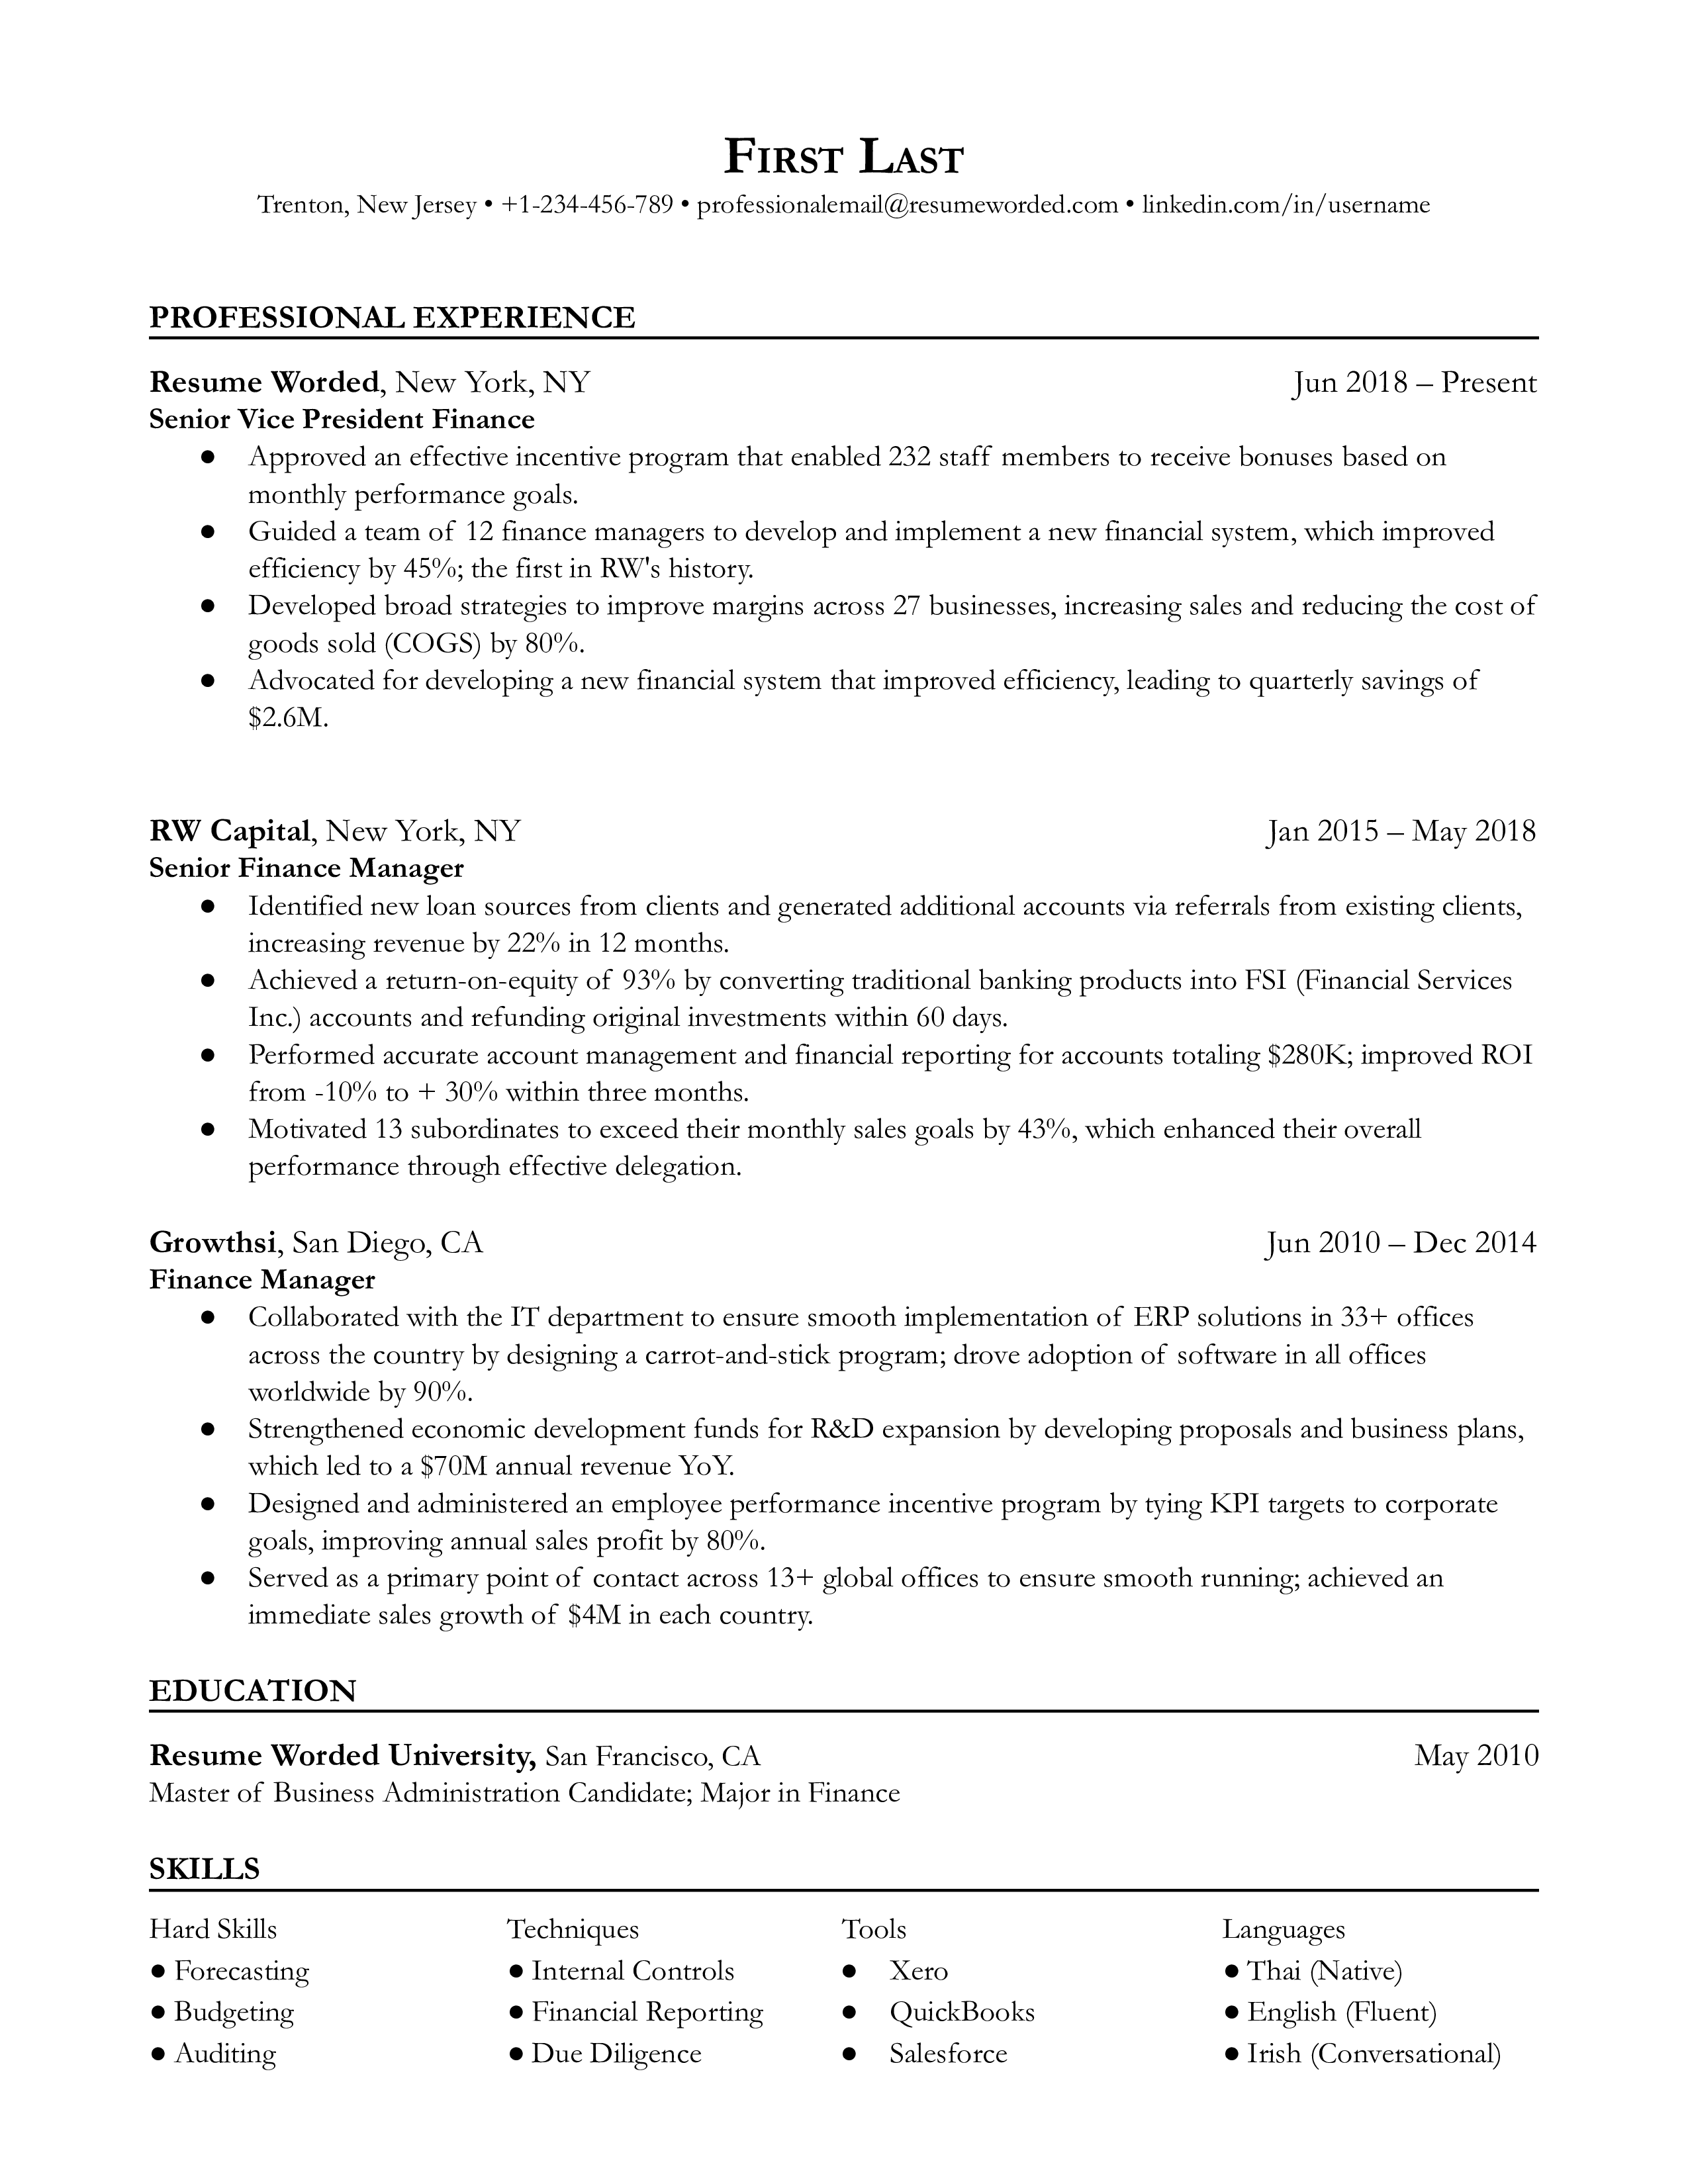 A senior vice president of finance resume sample that highlights the applicant’s executive experience and quantifiable success.